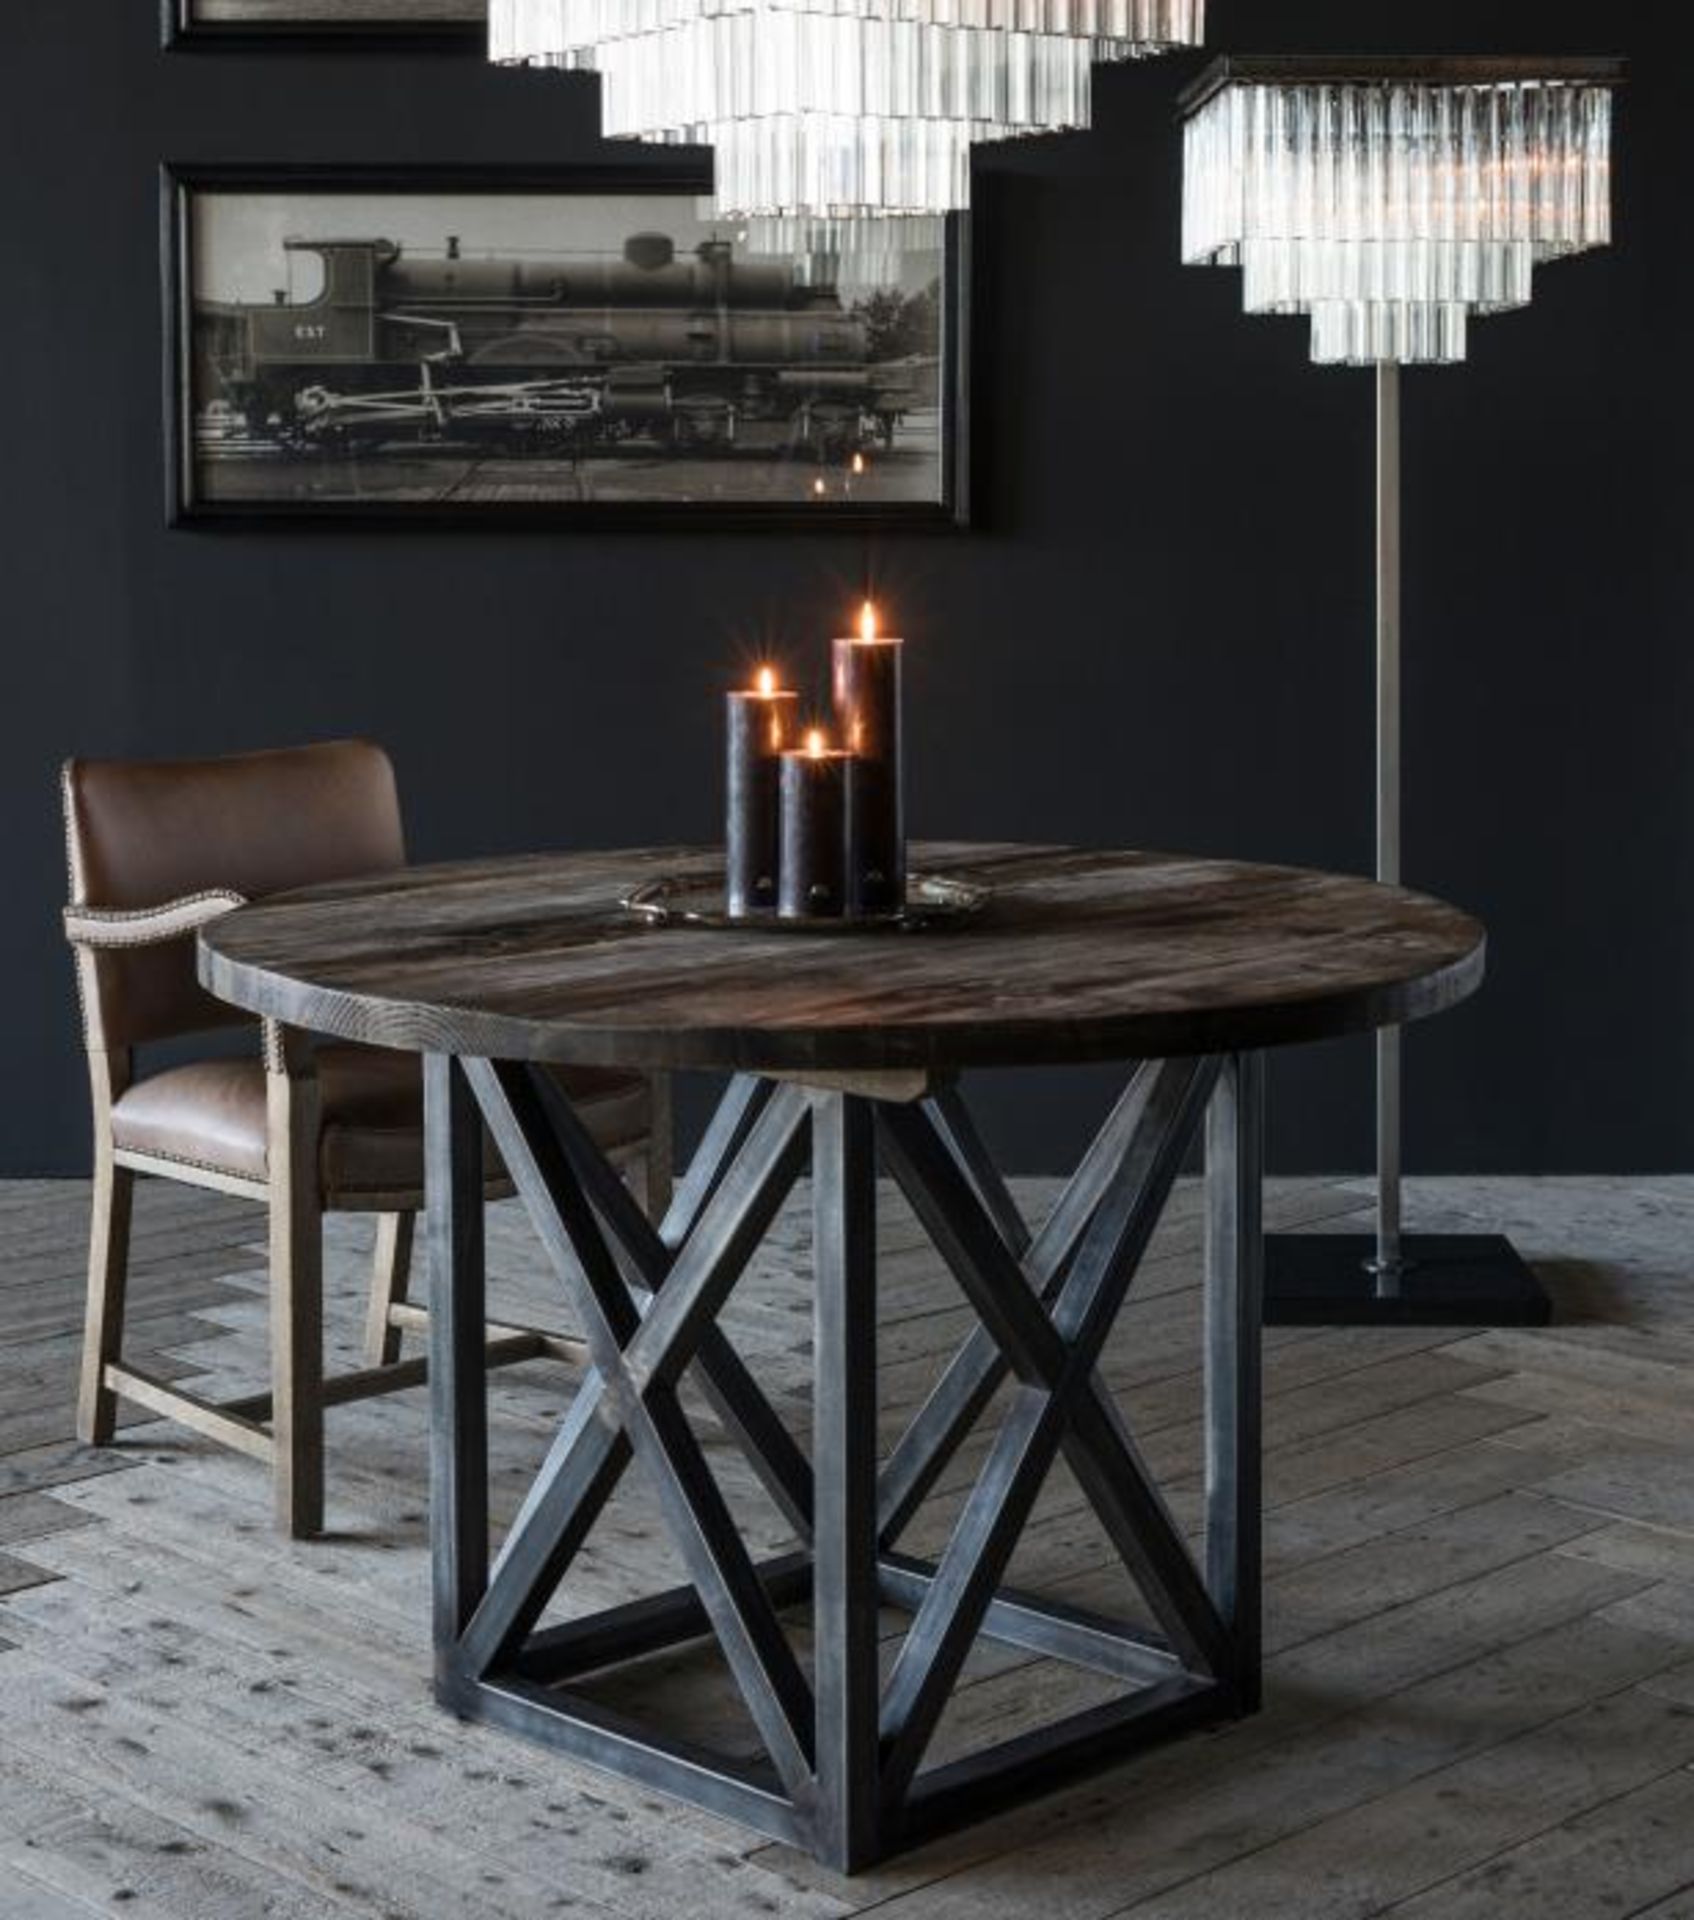 Axel Round Dining Table Marble and Iron Base 100cm diameter x 76cm tall This round version of our - Image 2 of 2